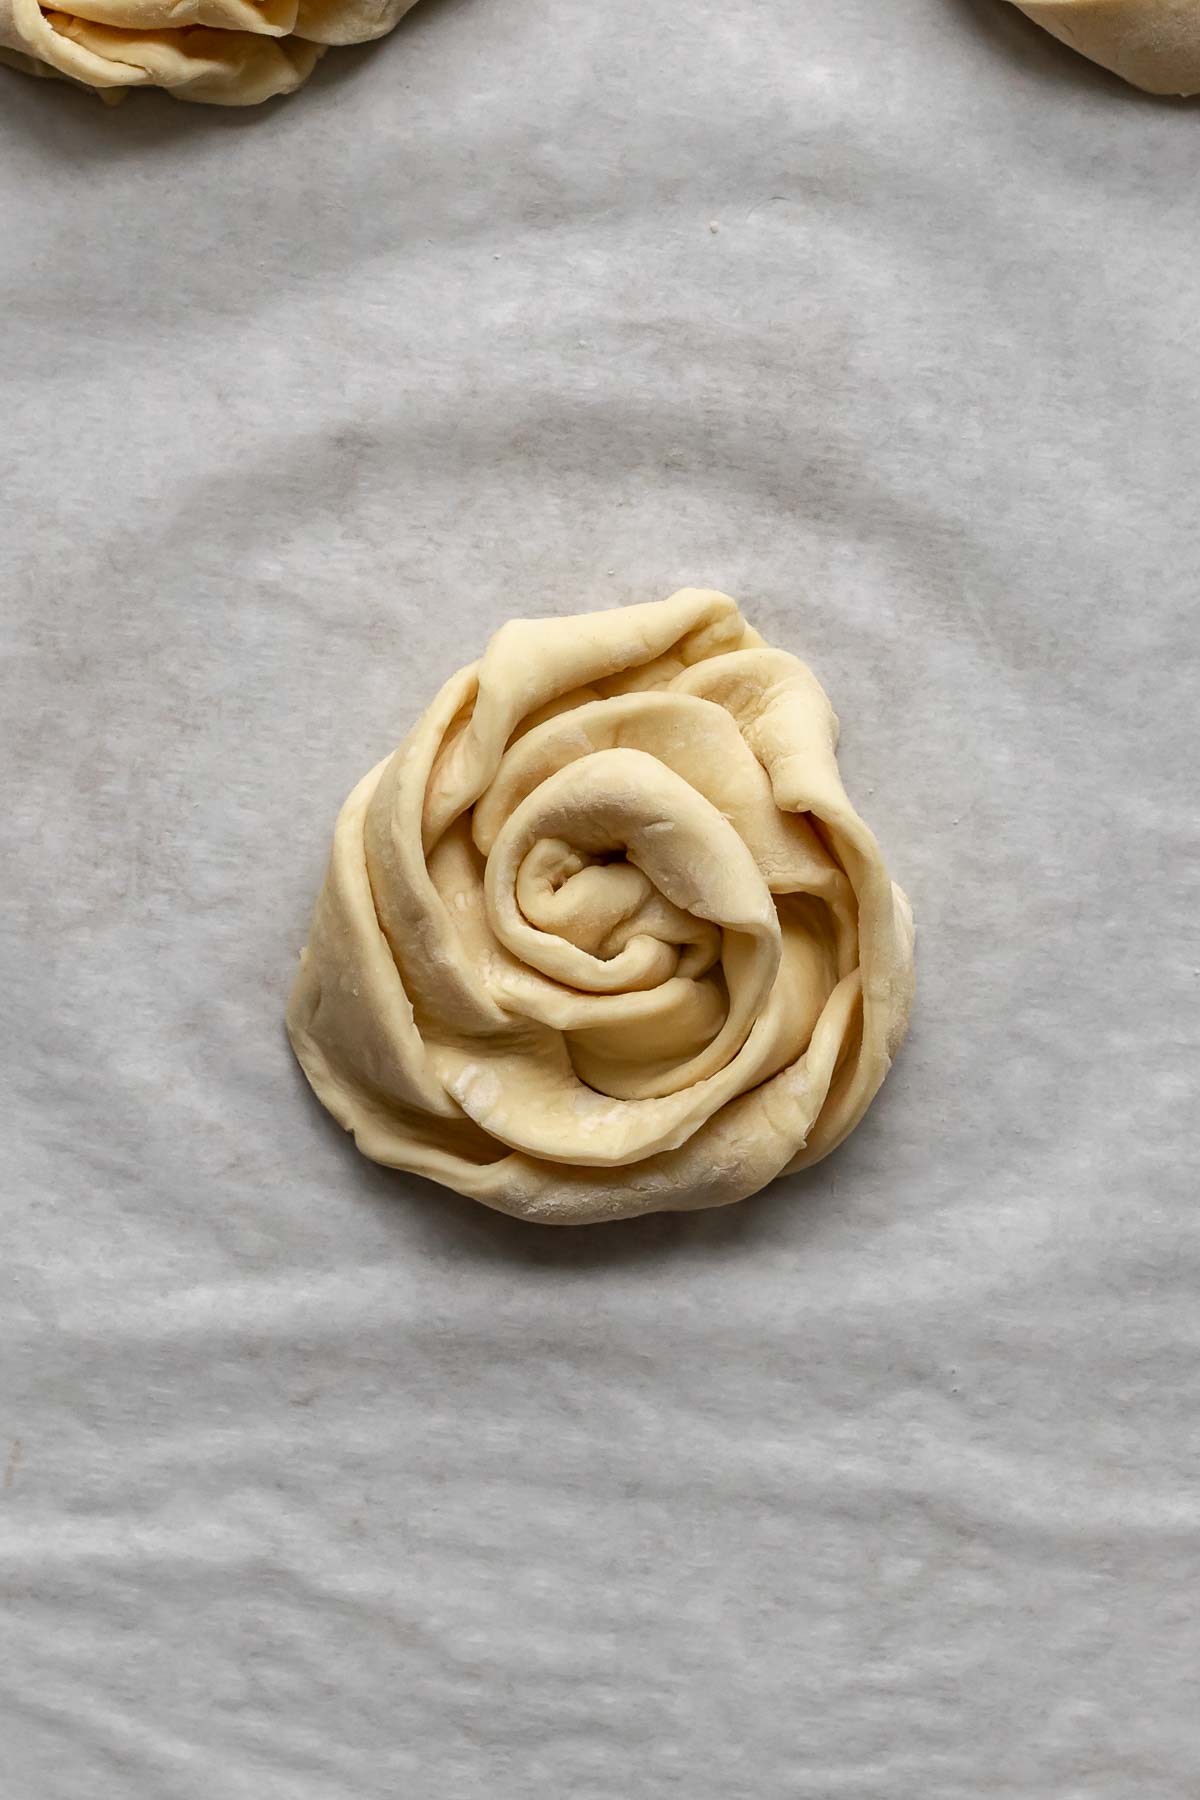 Puff pastry strips coiled into a rose.